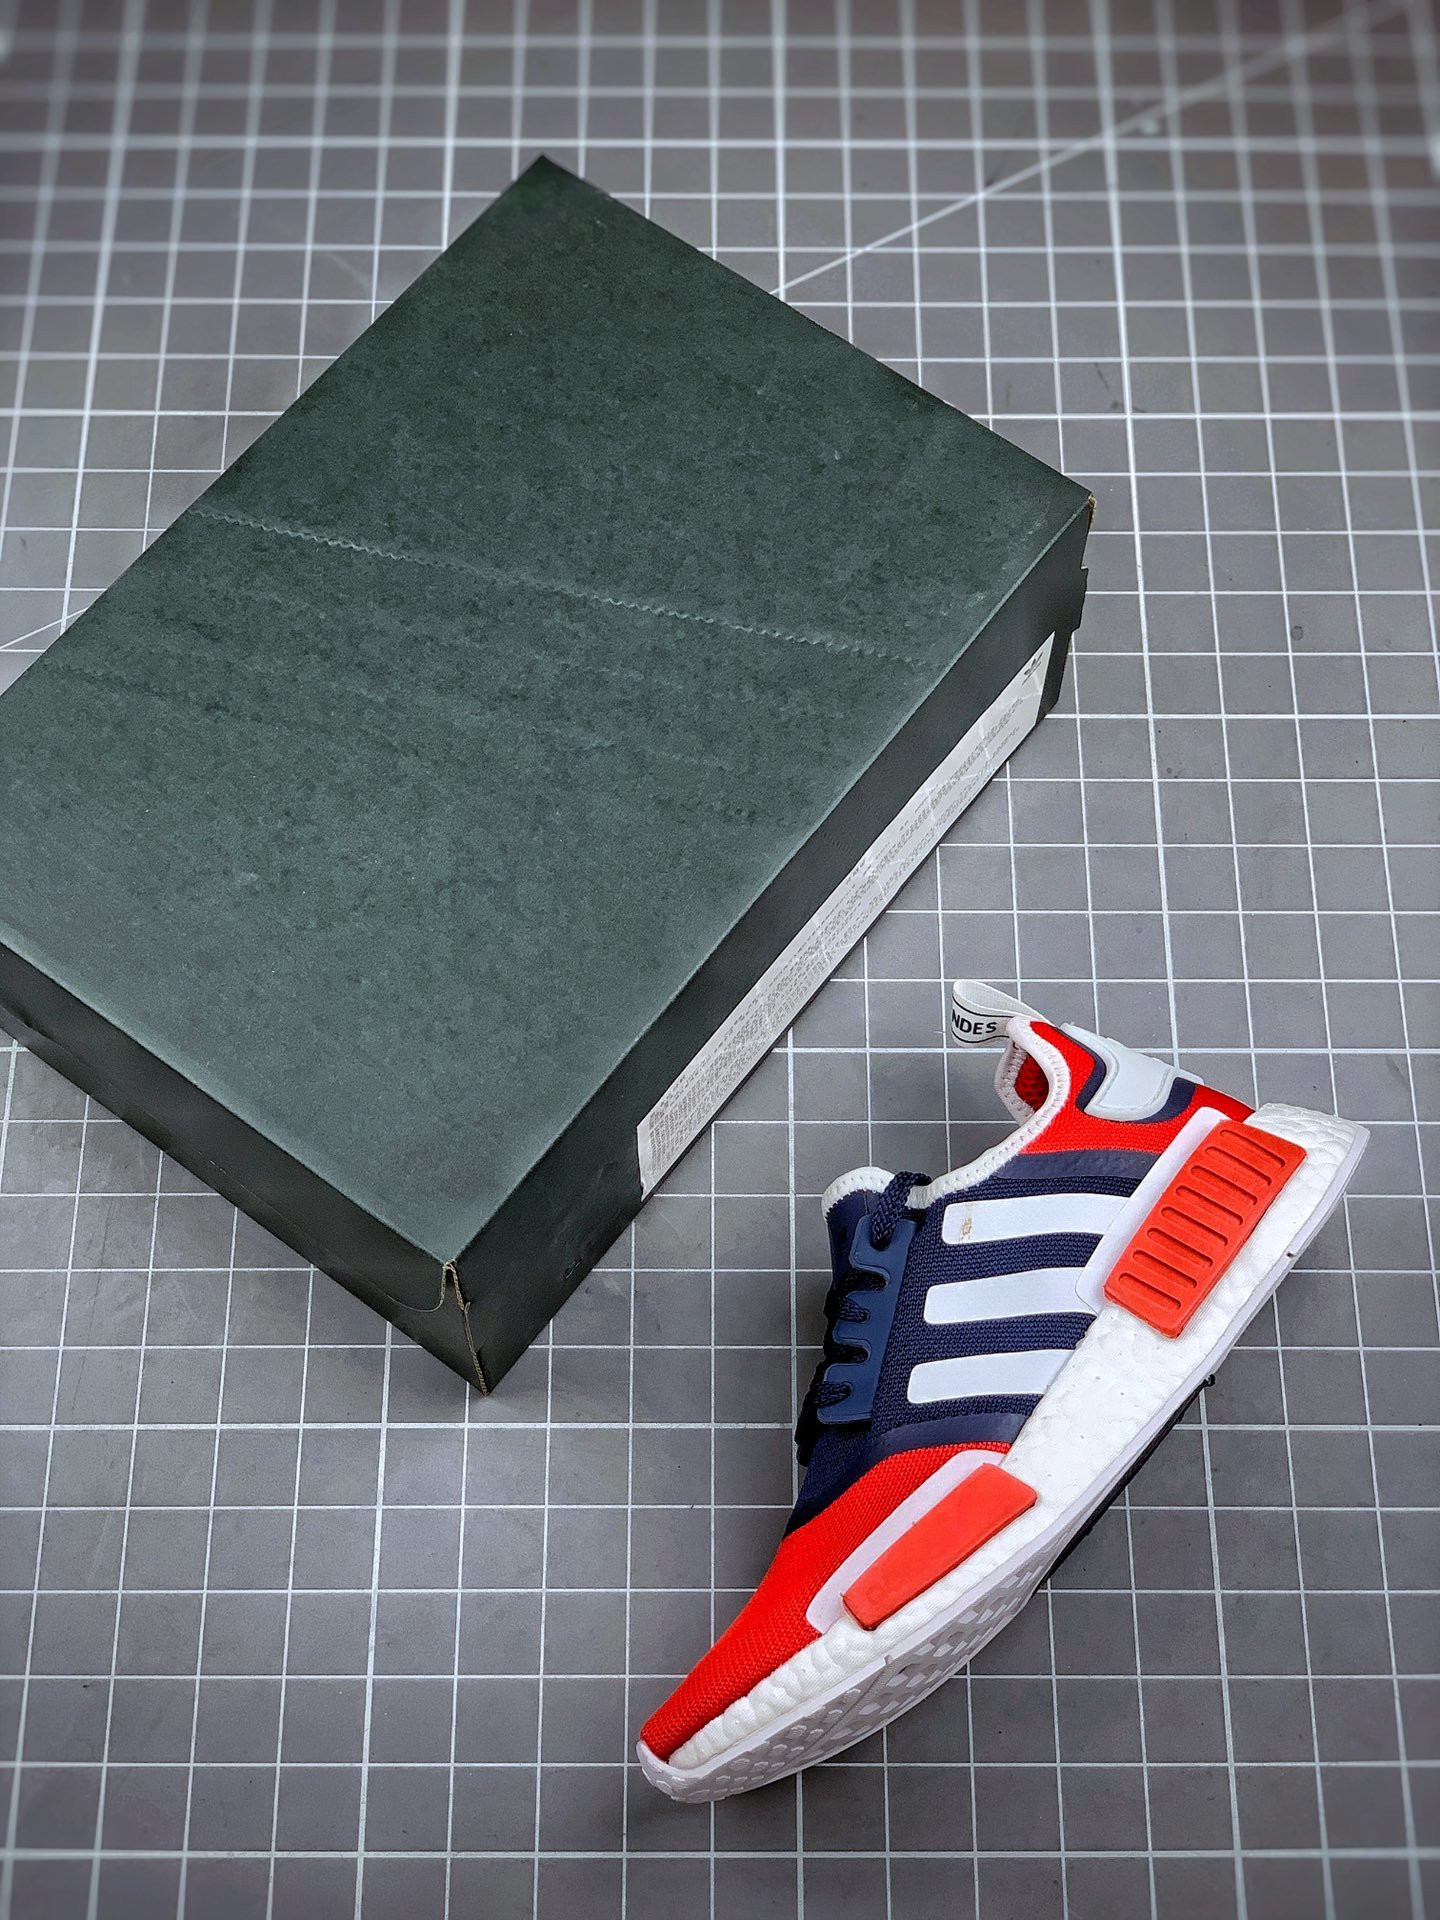 Adidas NMD R1 Collegiate Navy Scarlet-Cloud White For Sale